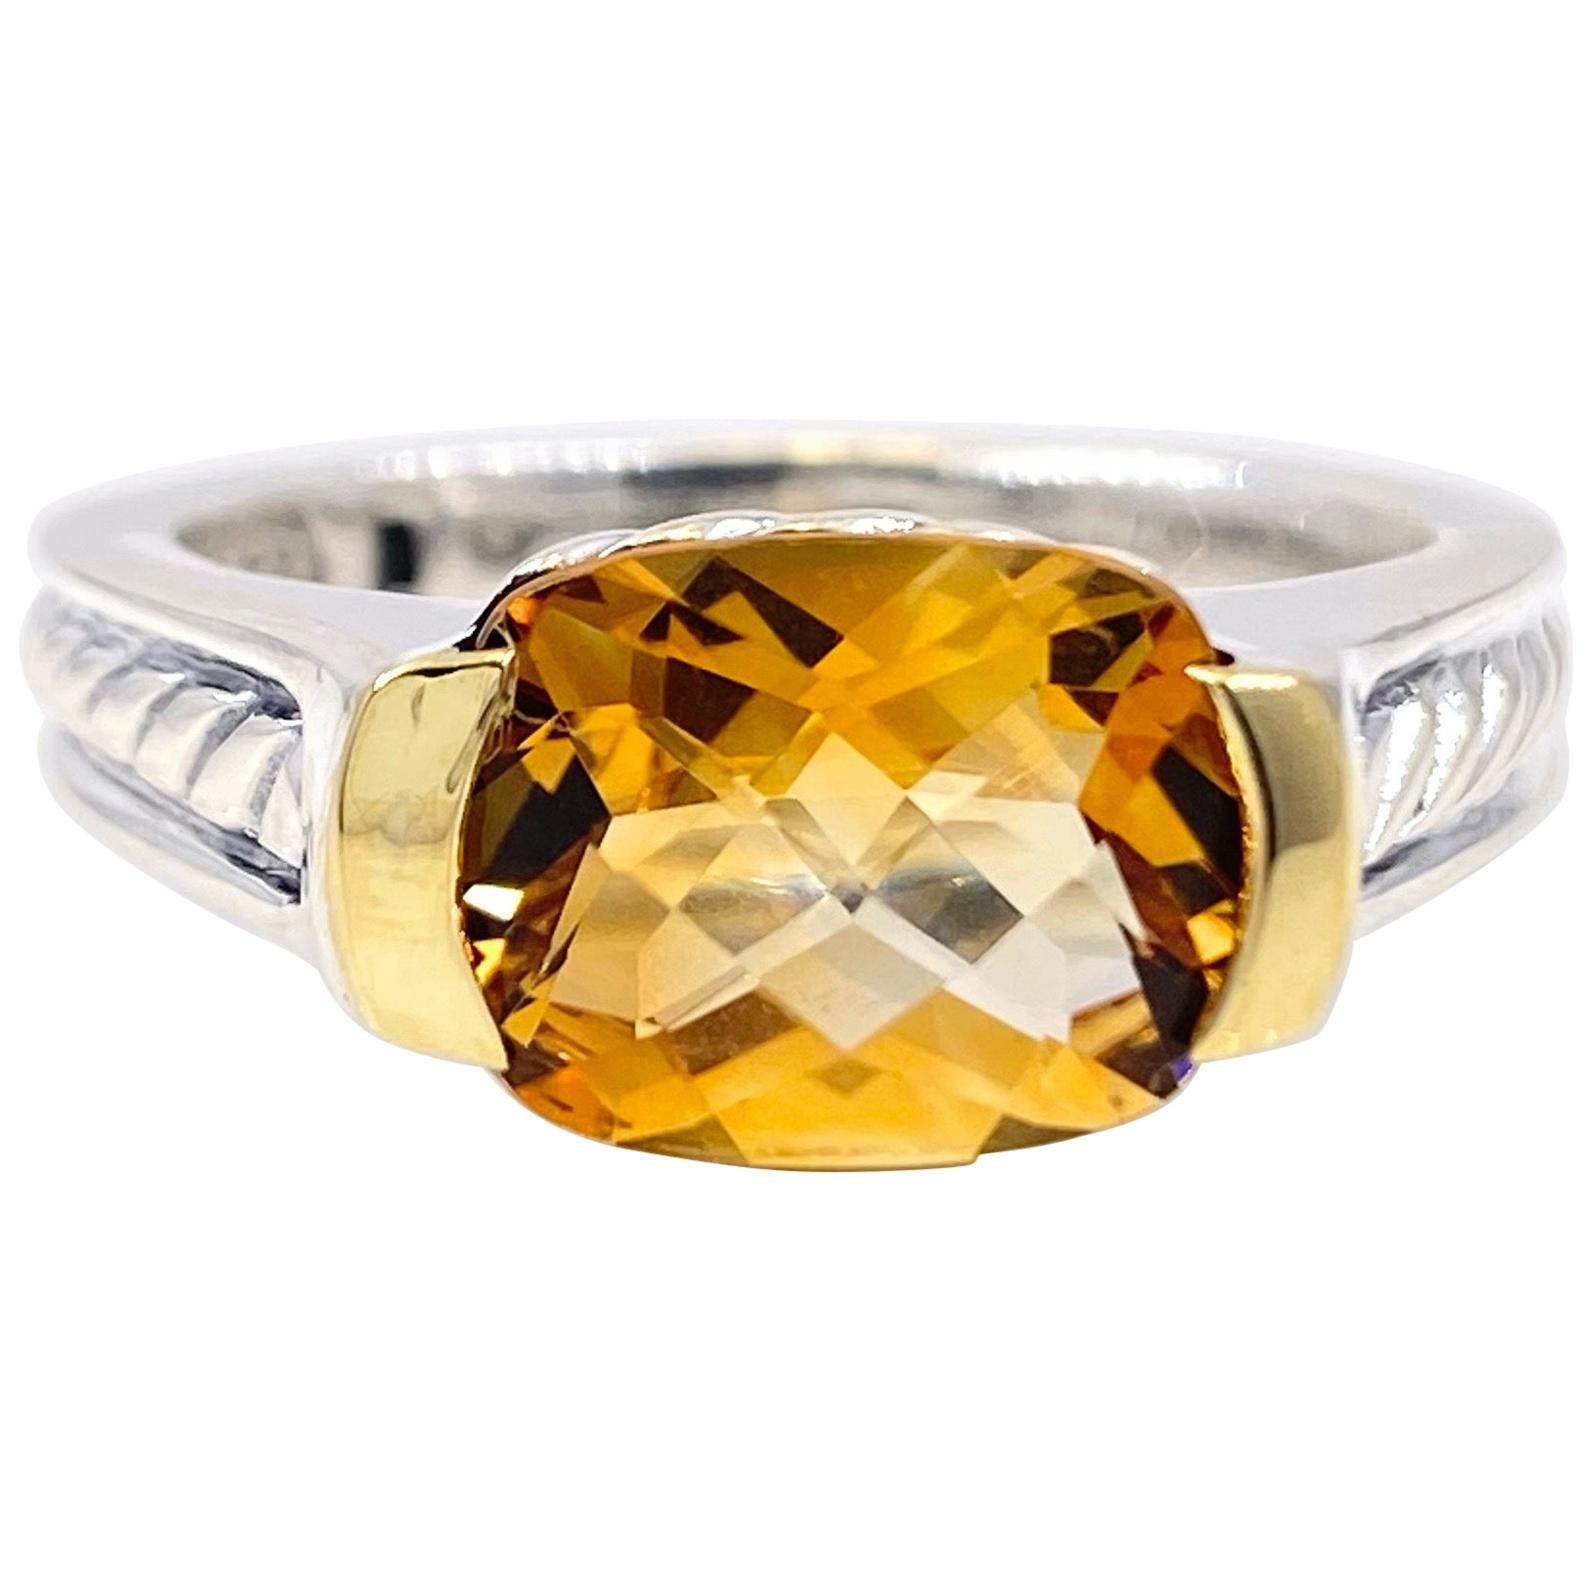 David Yurman Faceted Citrine Ring 18 Karat Yellow Gold and Sterling Silver